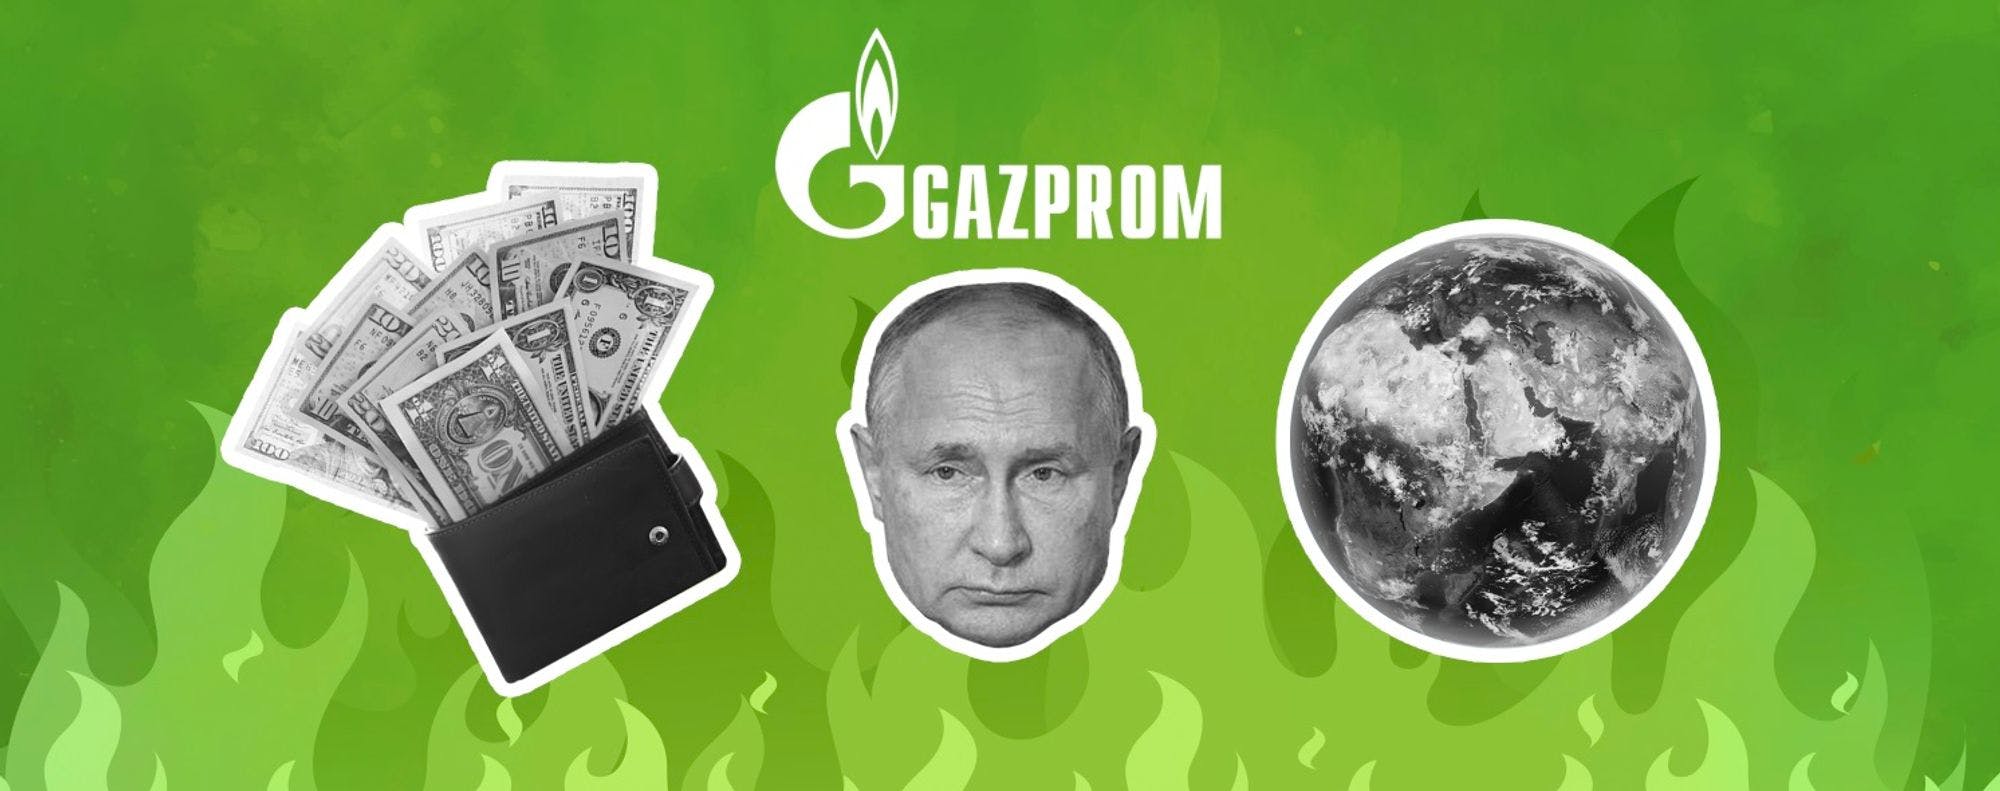 Collage showing Gazprom, Putin, money, and the earth.